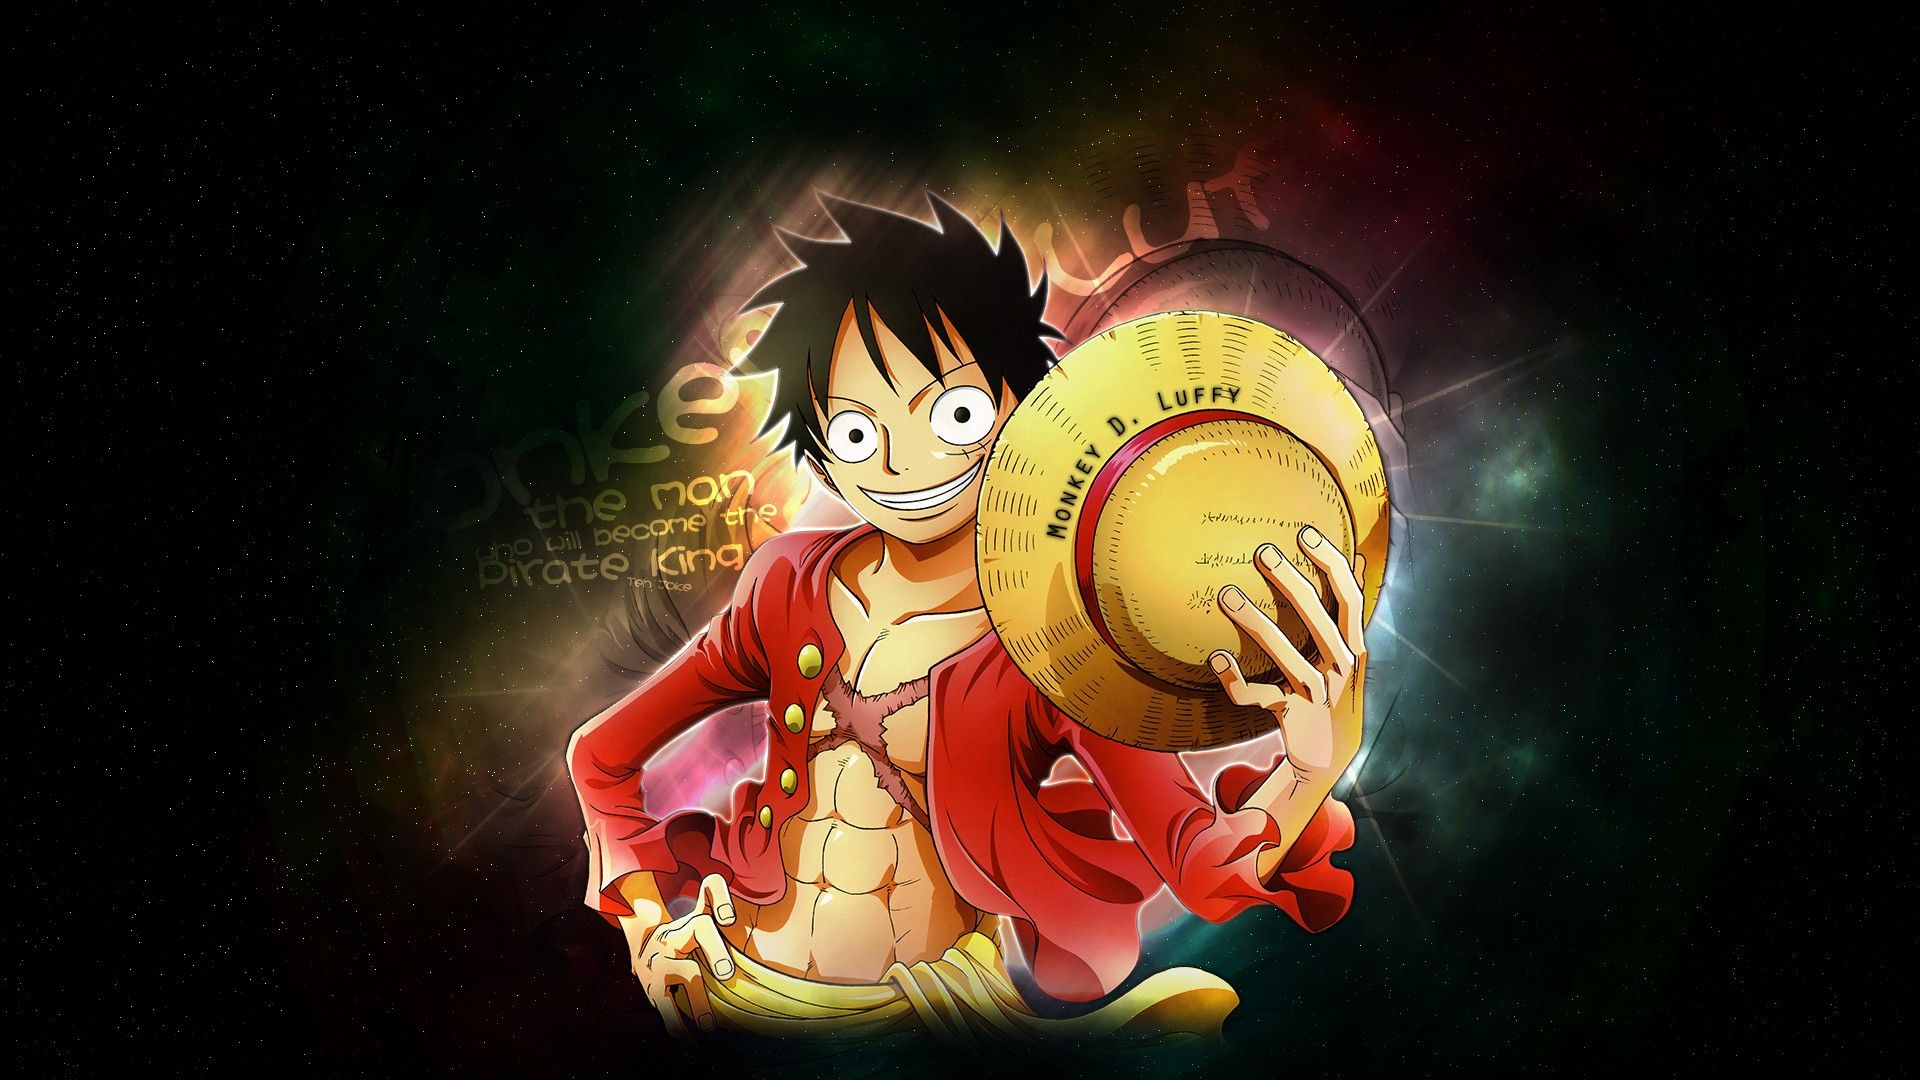 One Piece Luffy Wallpapers and Backgrounds 10814 - HD Wallpapers Site